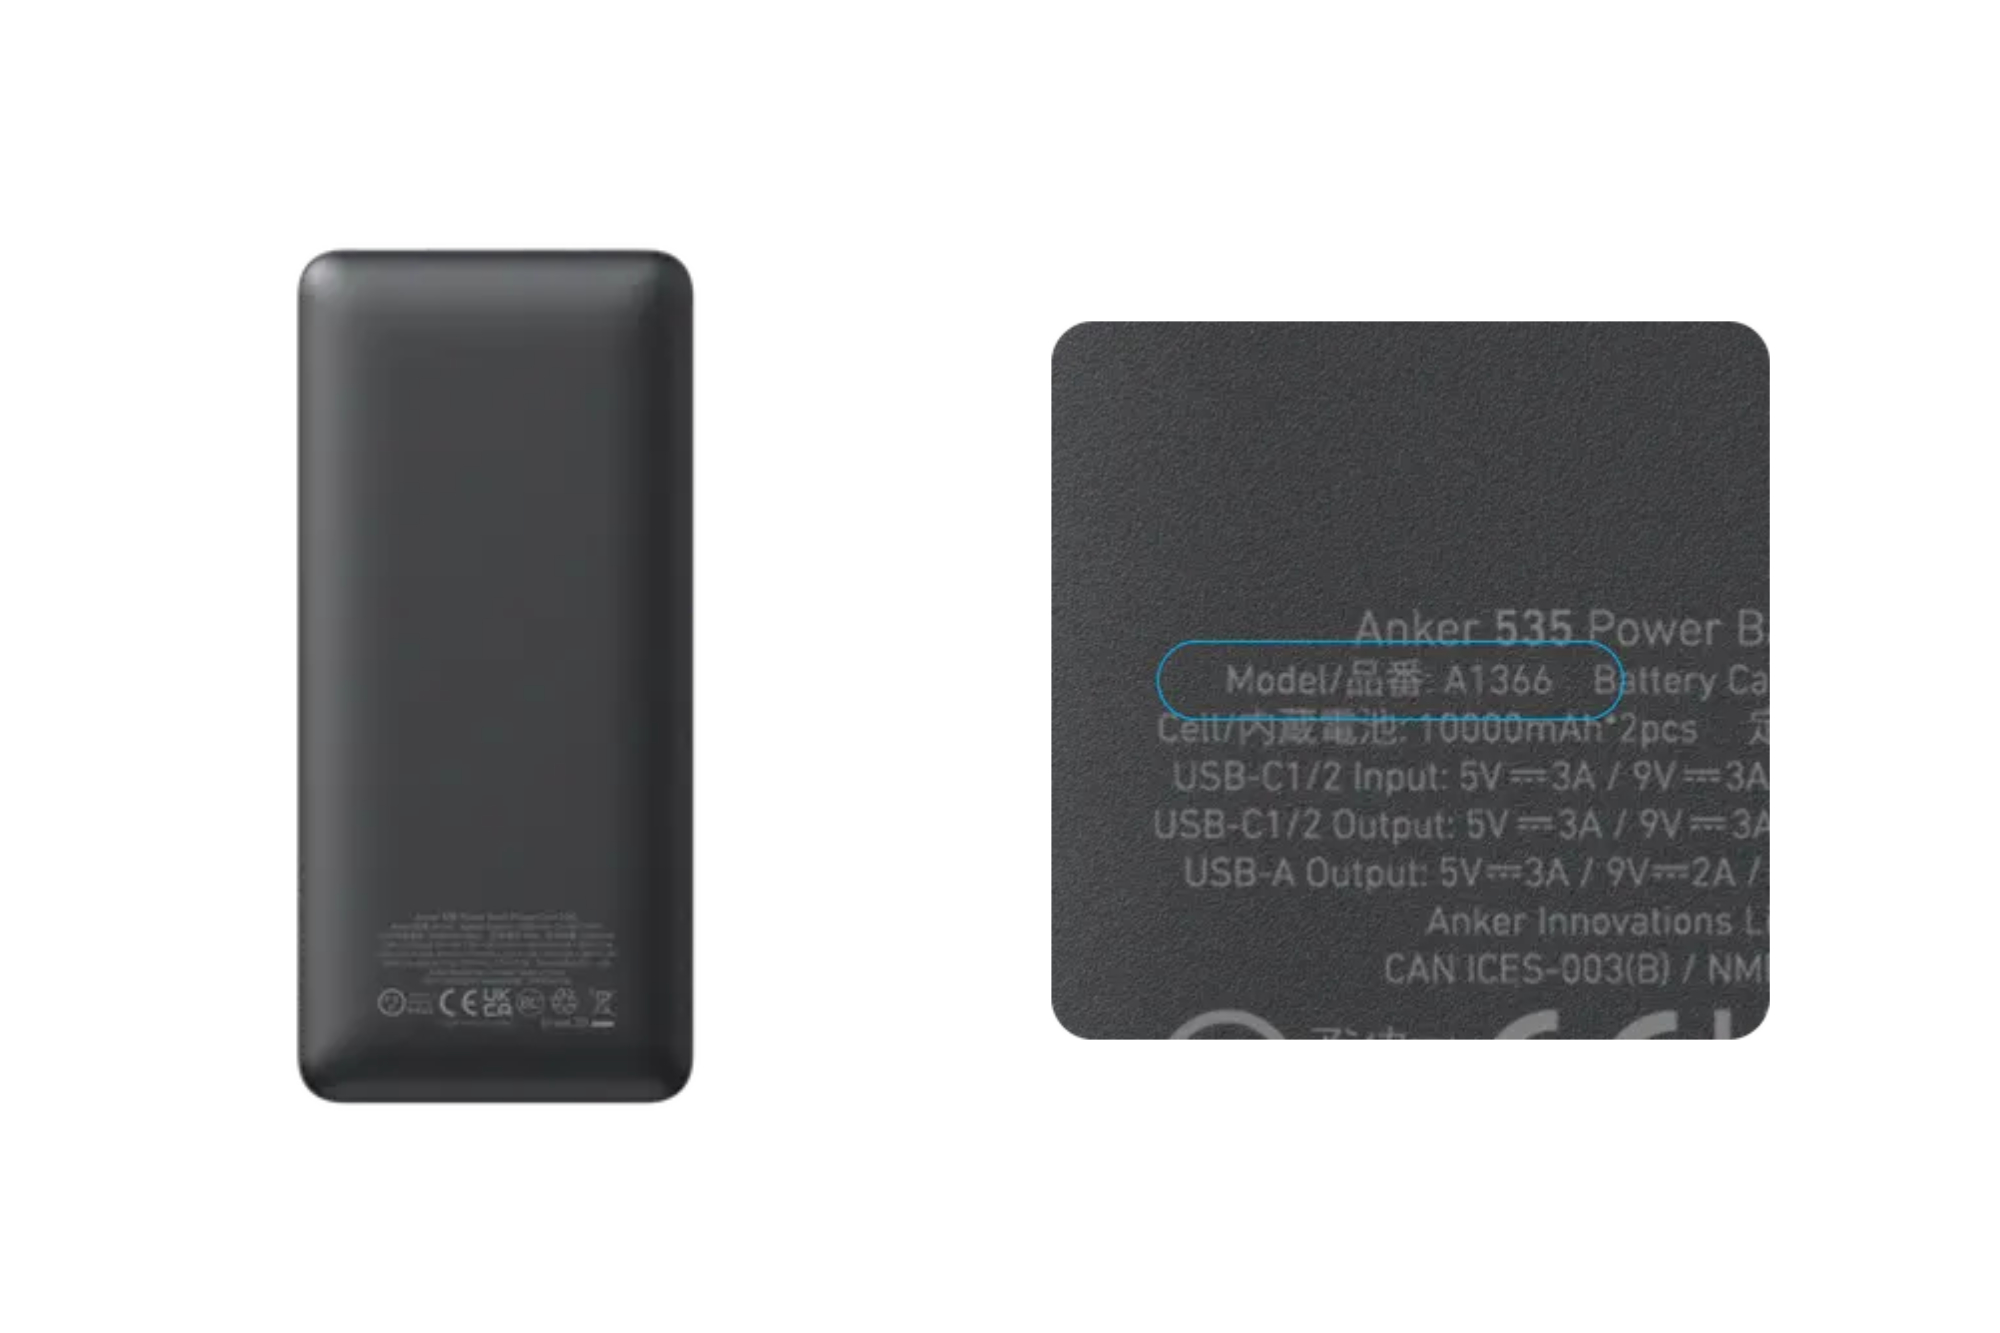 If you have this Anker battery pack, stop using it immediately